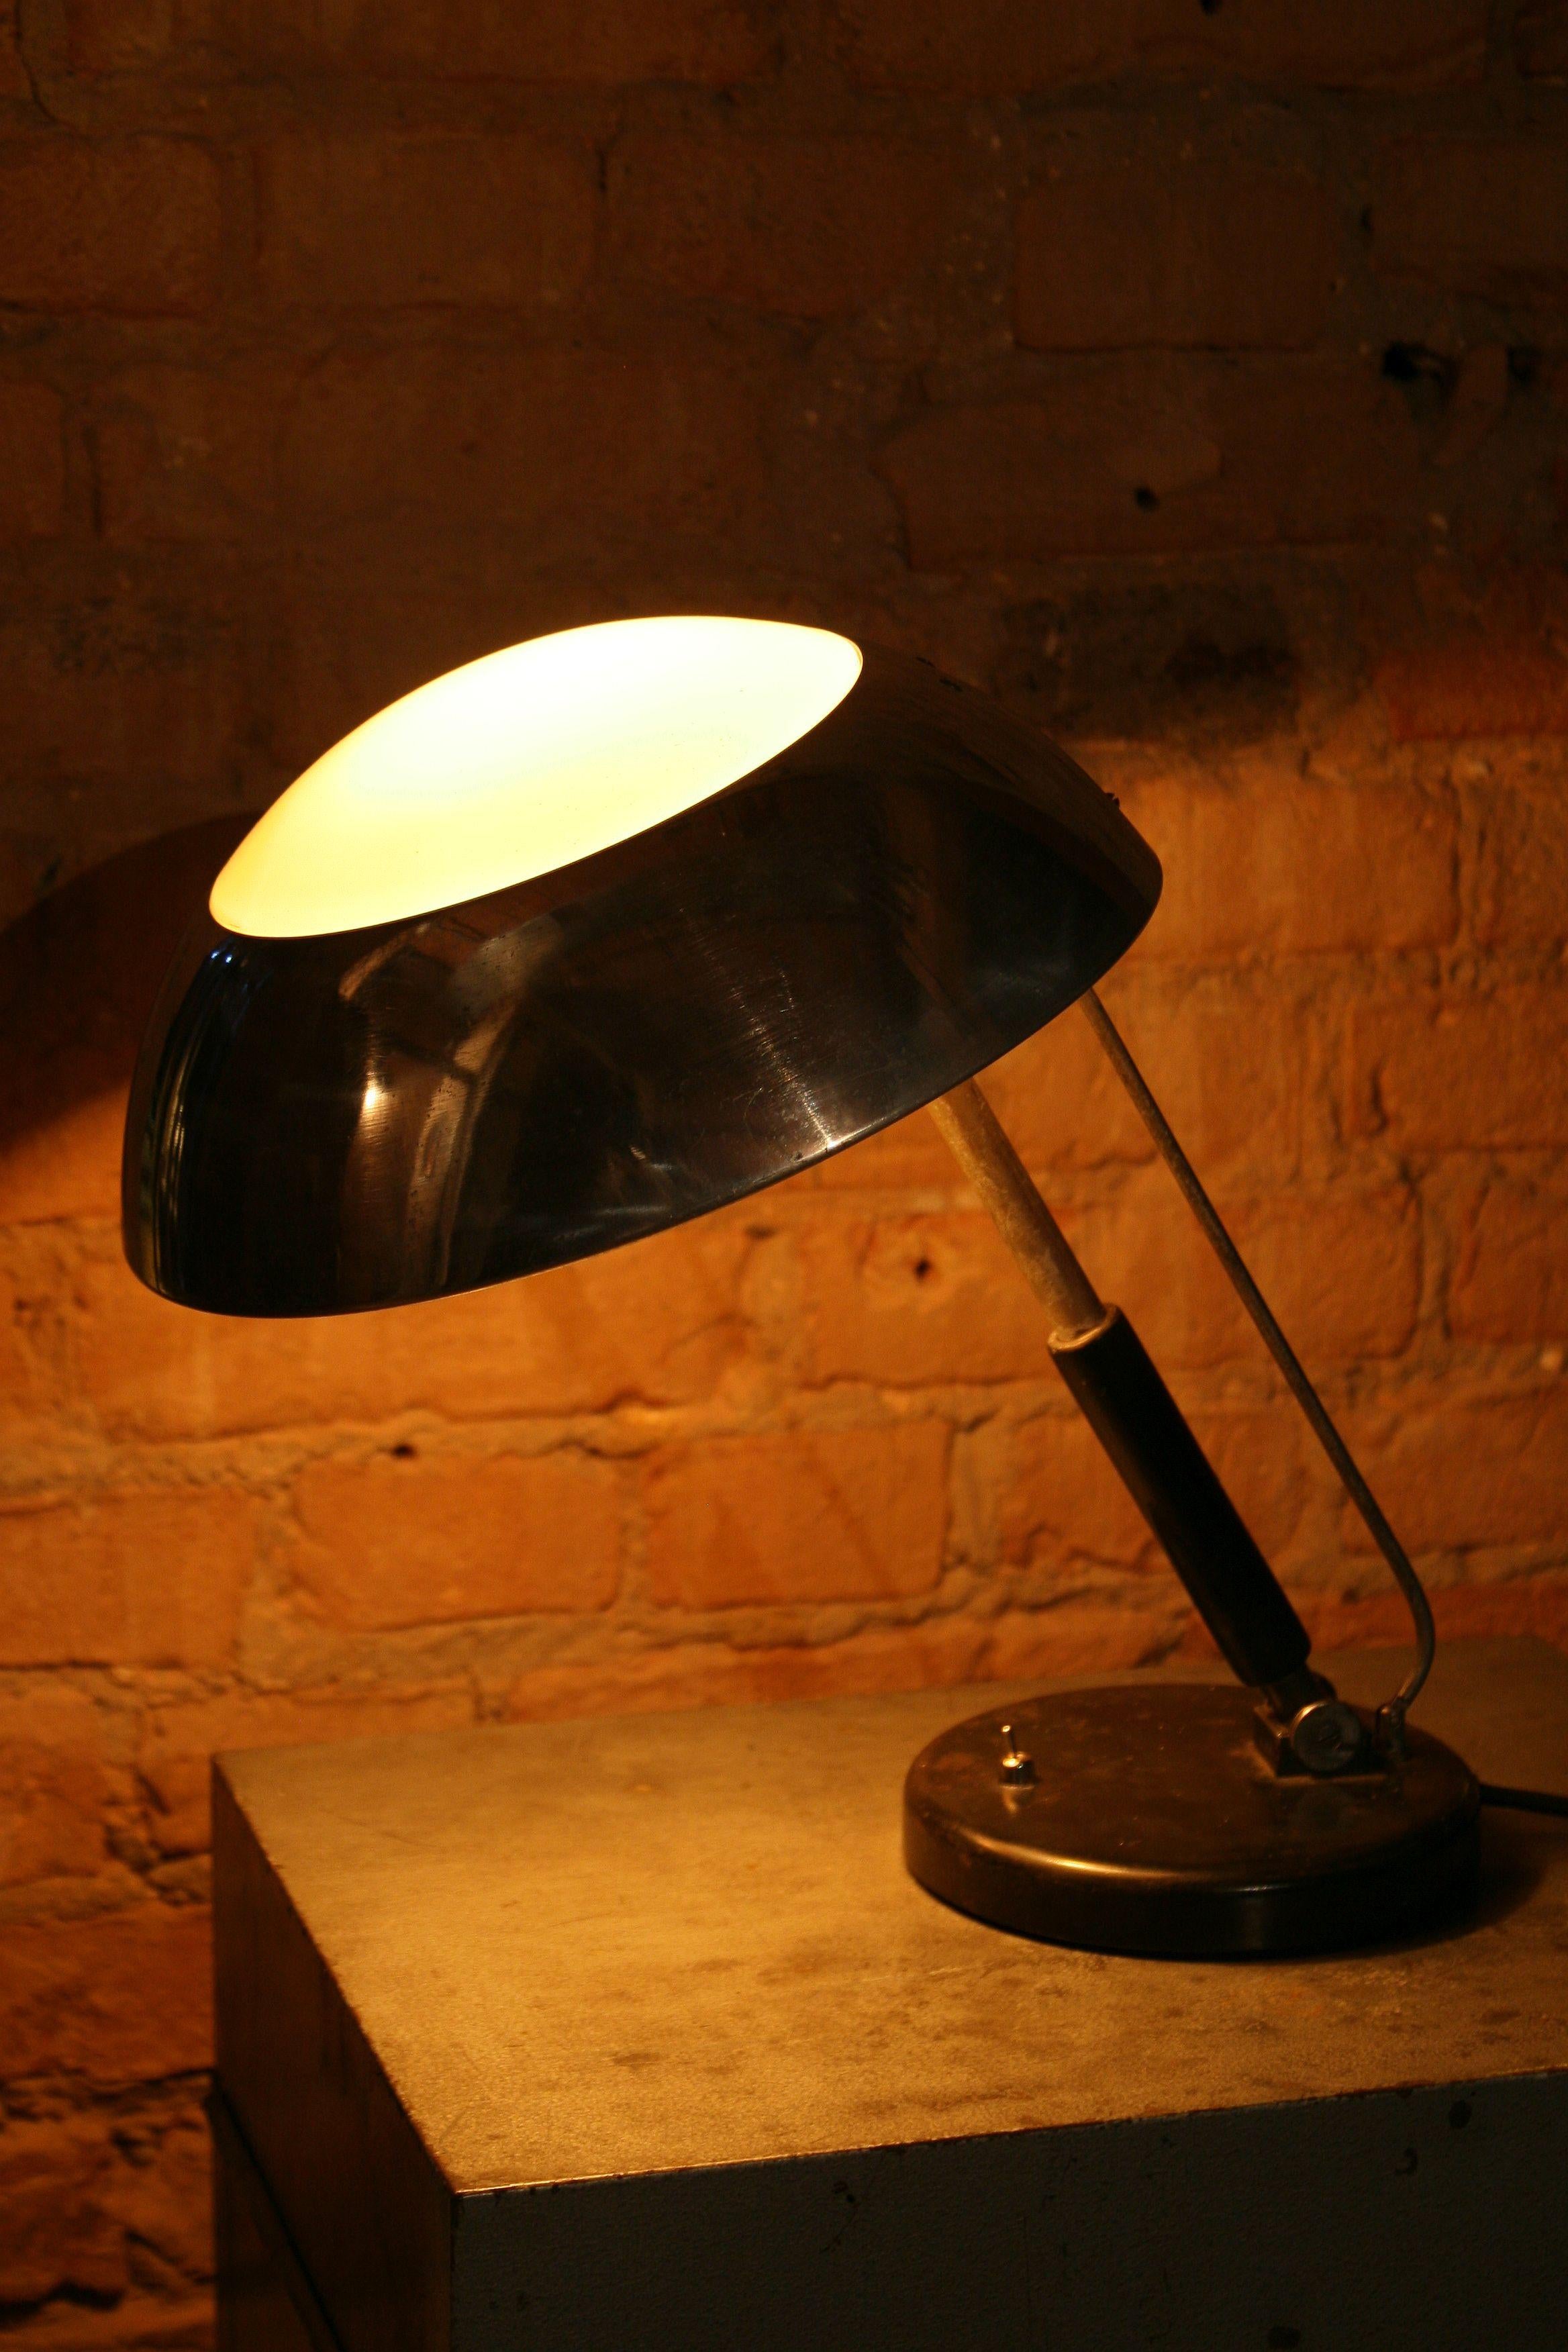 An original German desk lamp designed by Karl Trabert. It is one of the most interesting lighting products of the European Art Deco style.
Date of production: 1930.
Construction:
The base is made of profiled steel sheet with an internal cast-iron